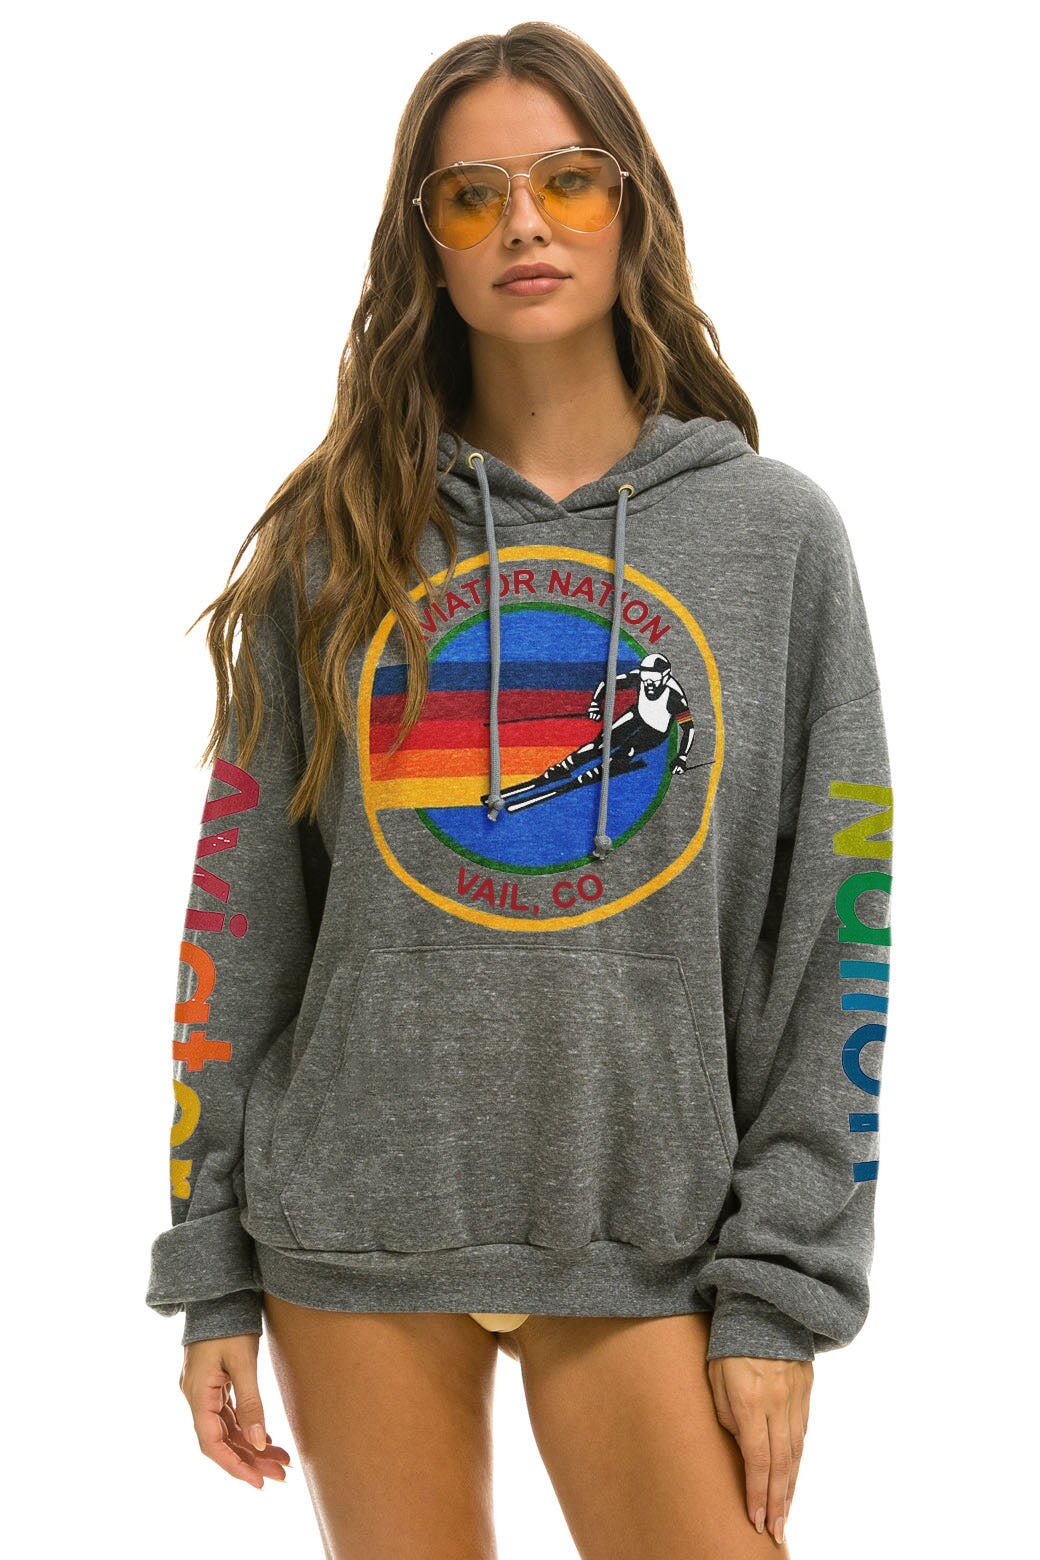 AVIATOR NATION VAIL RELAXED PULLOVER HOODIE - HEATHER GREY Hoodie Aviator Nation 